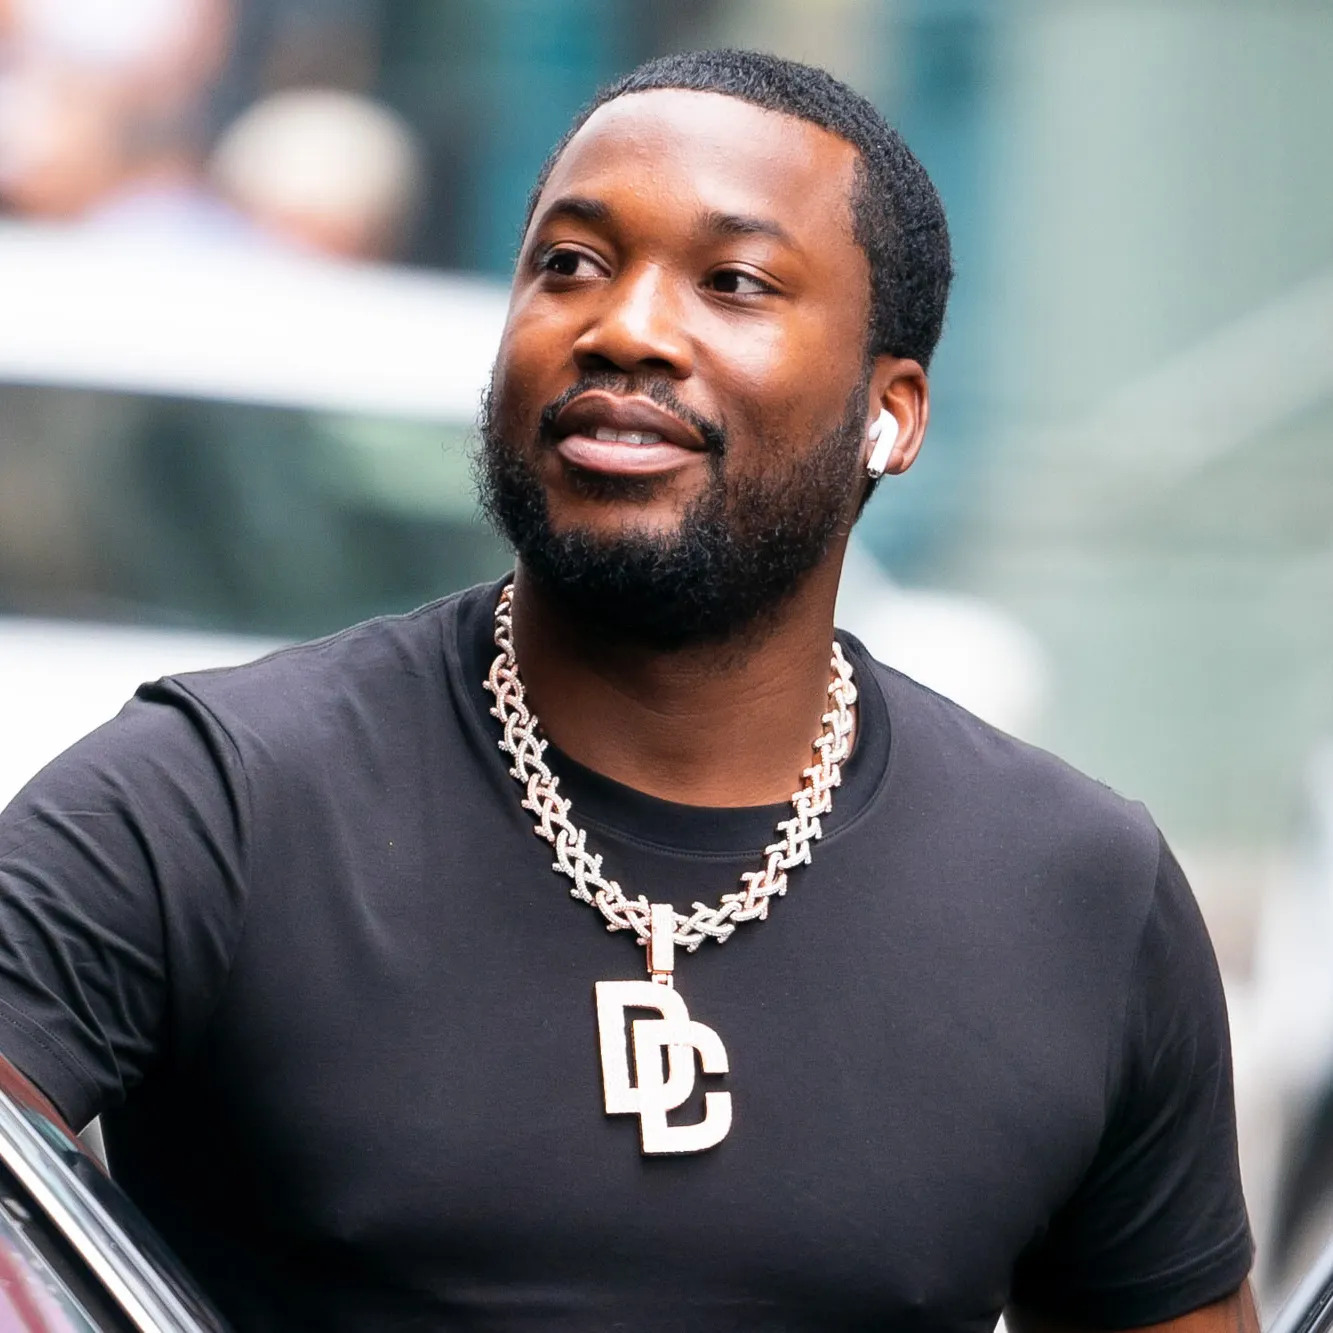 Before Deleting His Account Meek Mill Explains Why He Is Leaving Twitter "Forever."